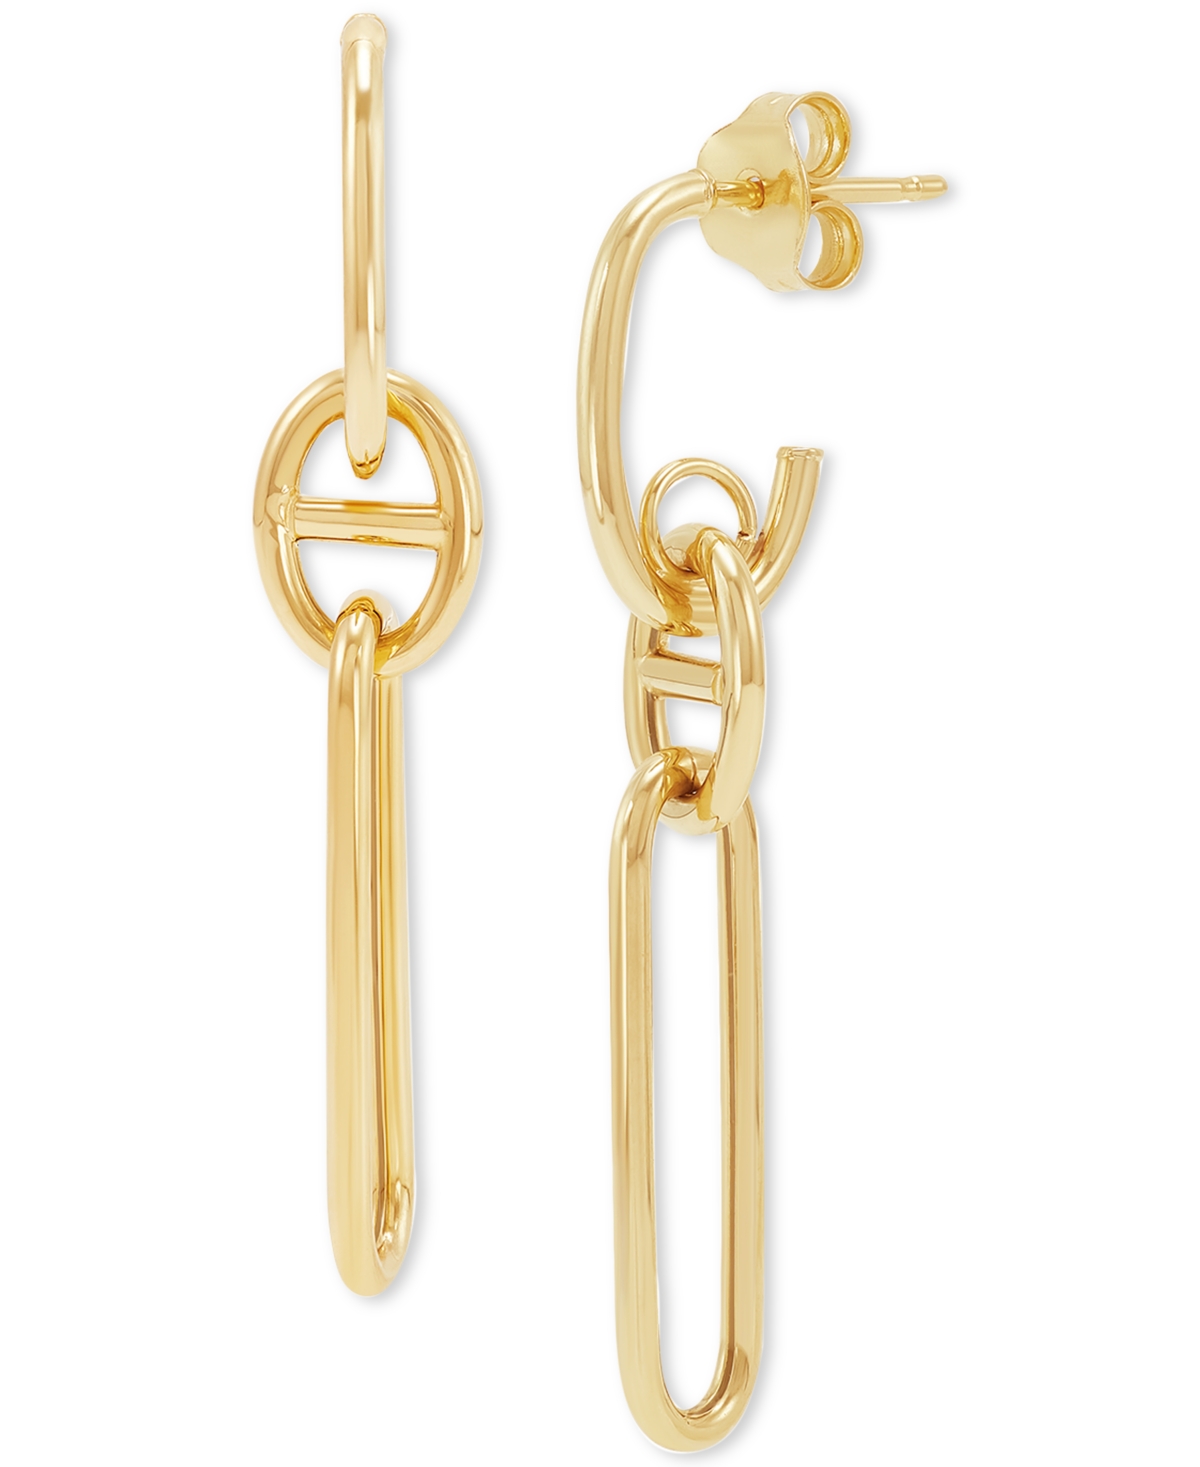 Italian Gold Polished Mariner & Paperclip Link Drop Earrings In 10k Gold